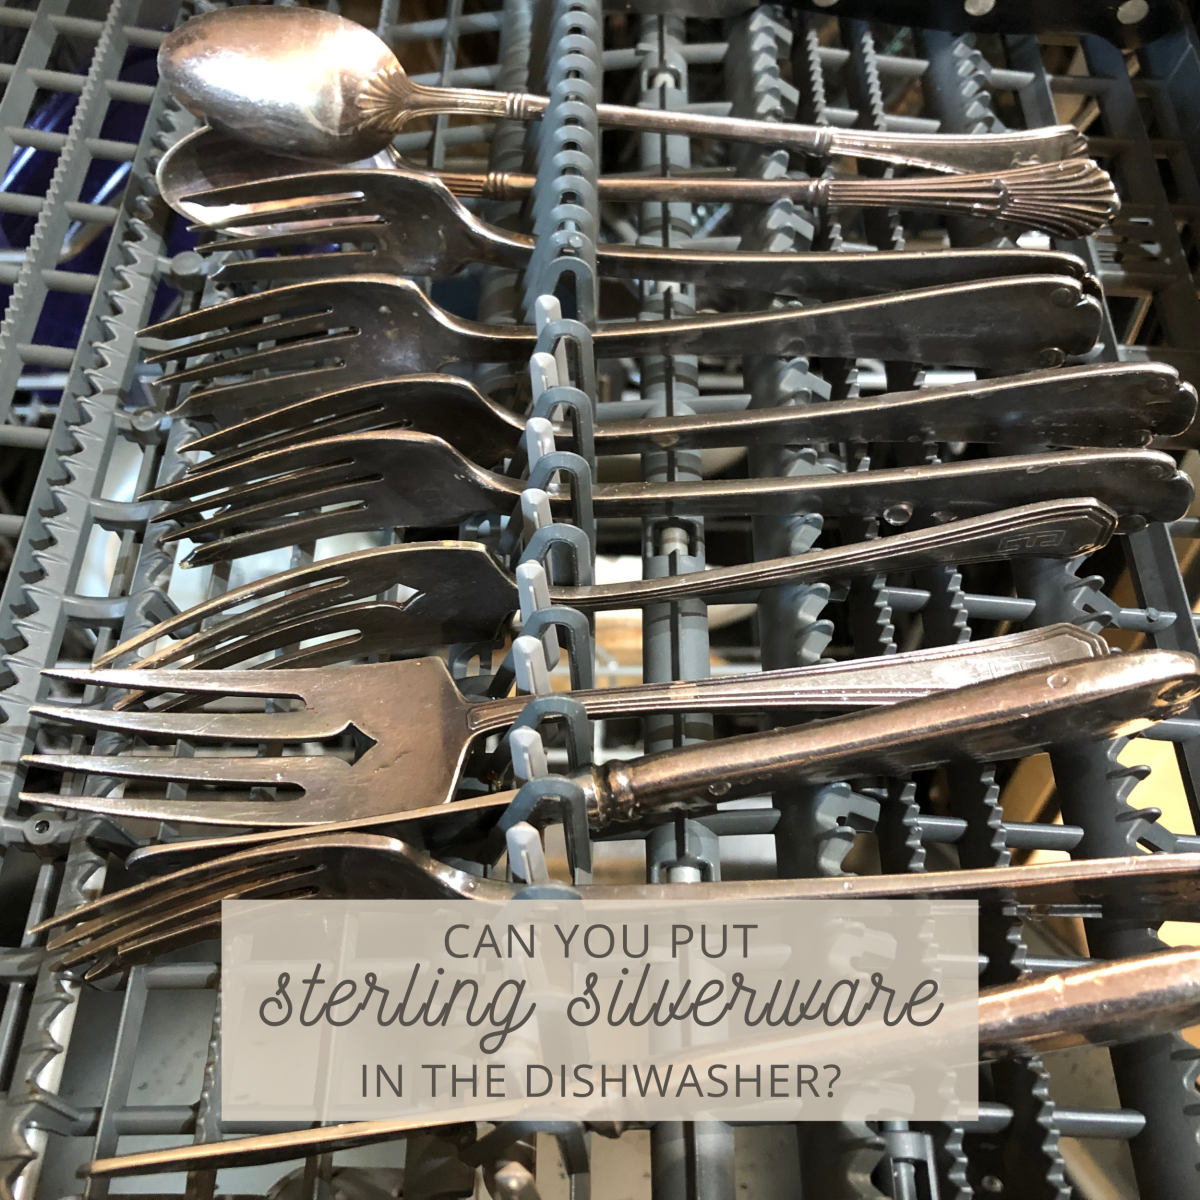 Can You Wash Sterling Silver or Silverware in the Dishwasher?